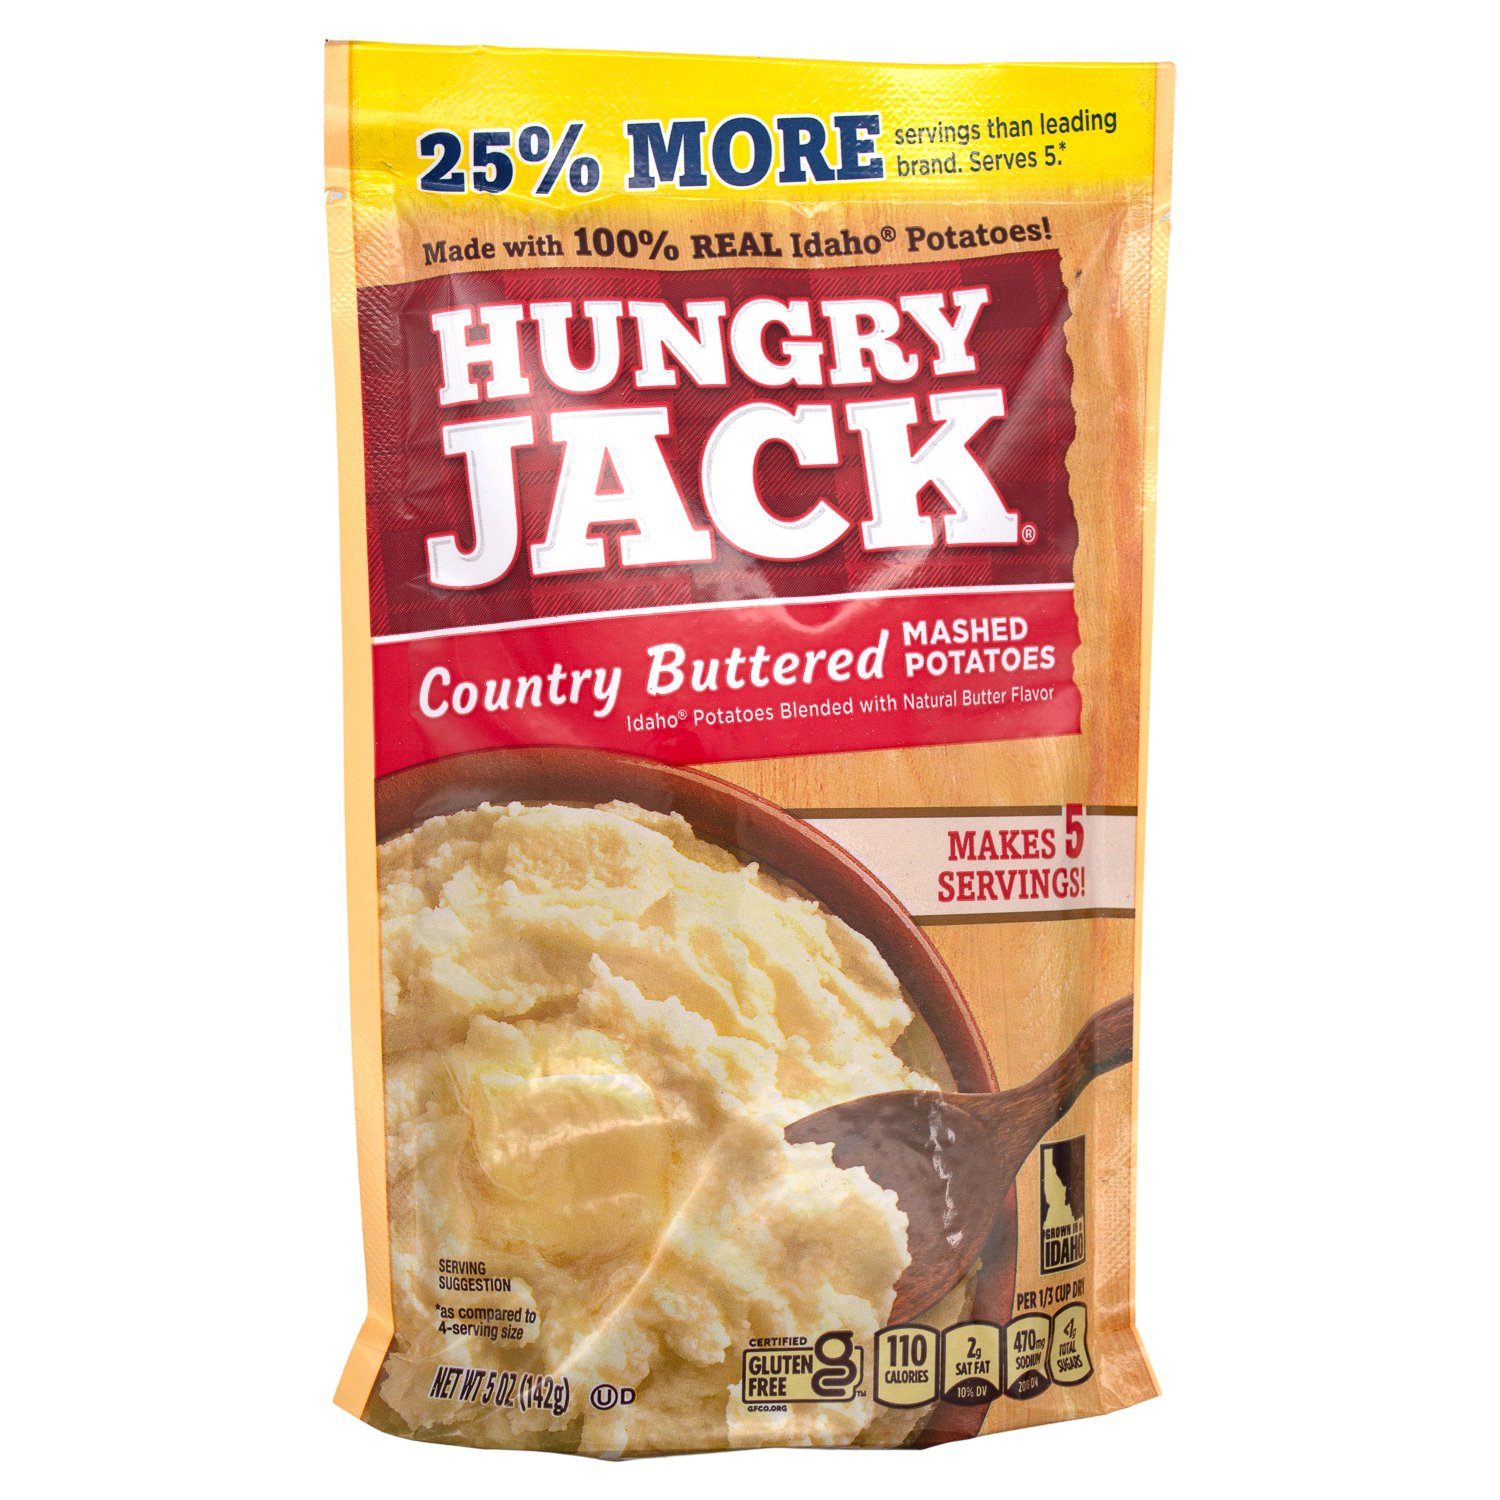 Hungry Jack Mashed Potatoes Hungry Jack Country Buttered 5 Ounce 